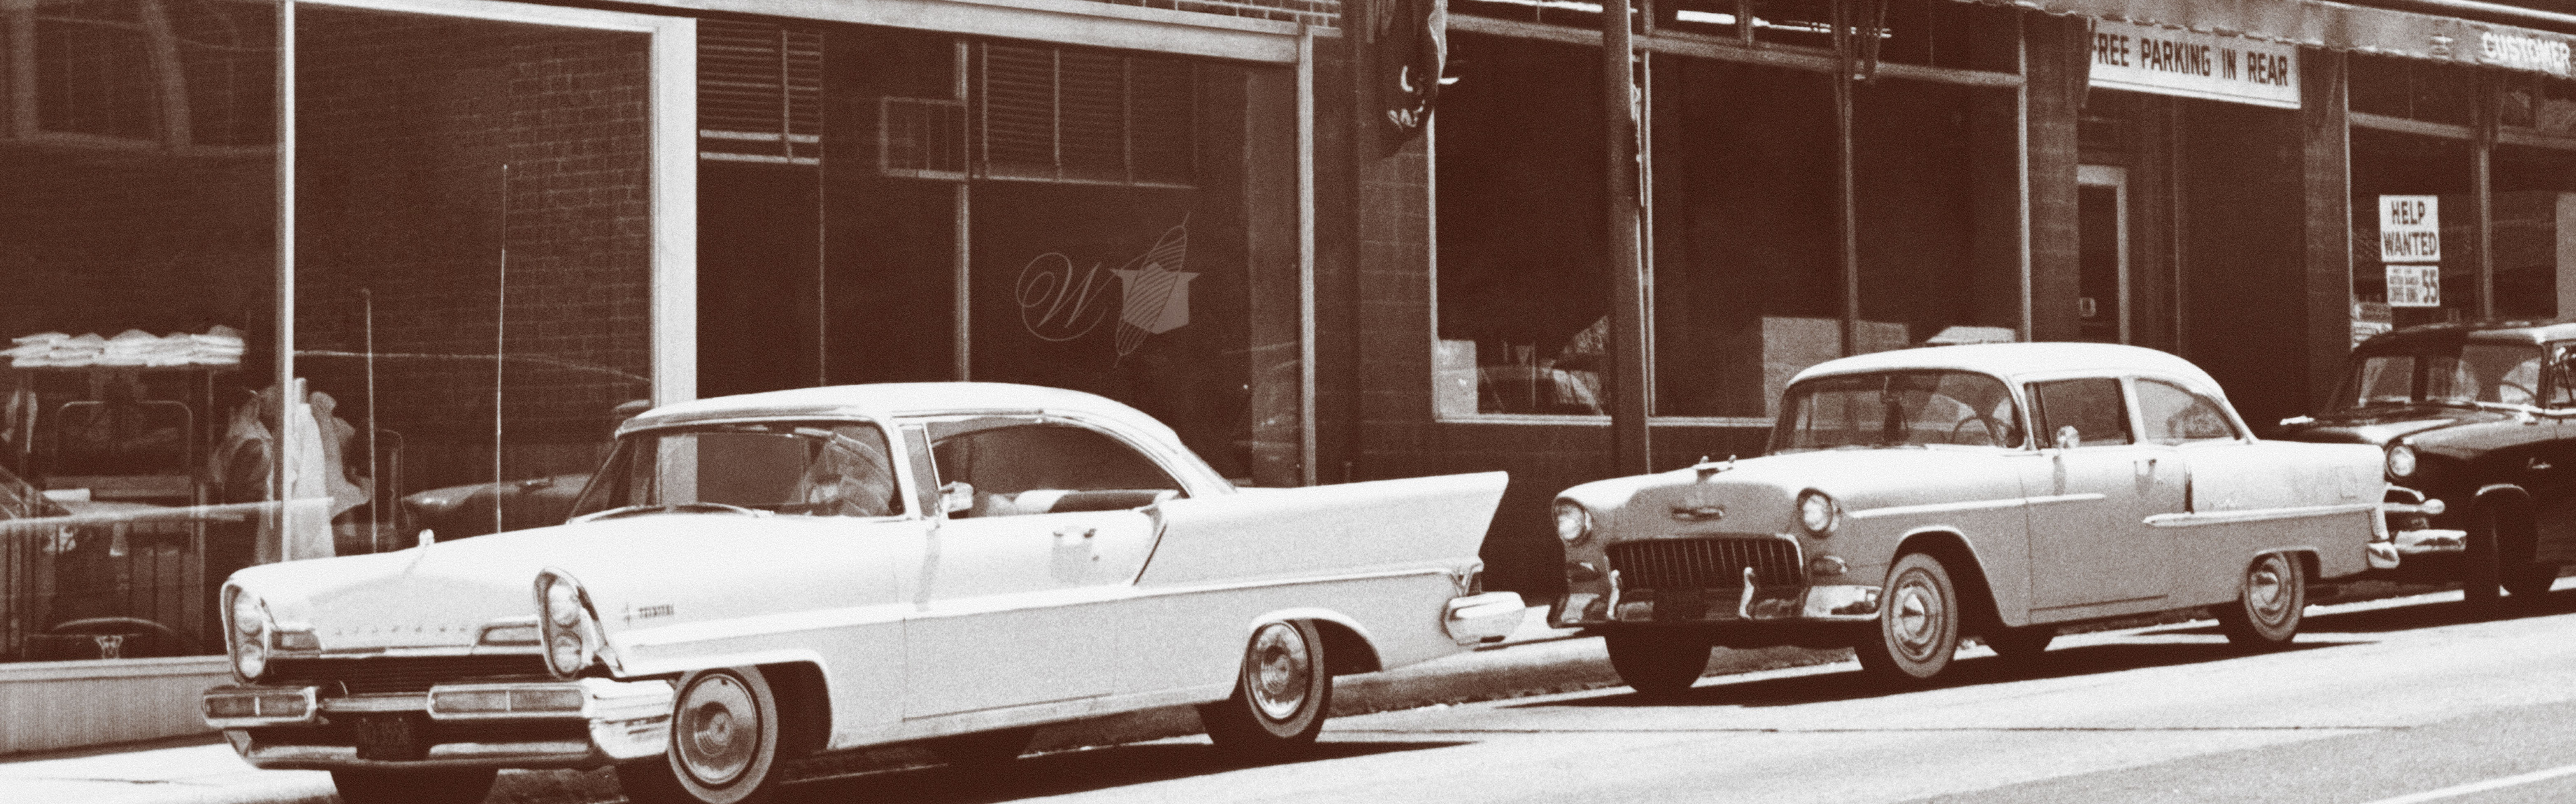 WAWAK Sewing Supply Vintage Cars on Street in Black and White